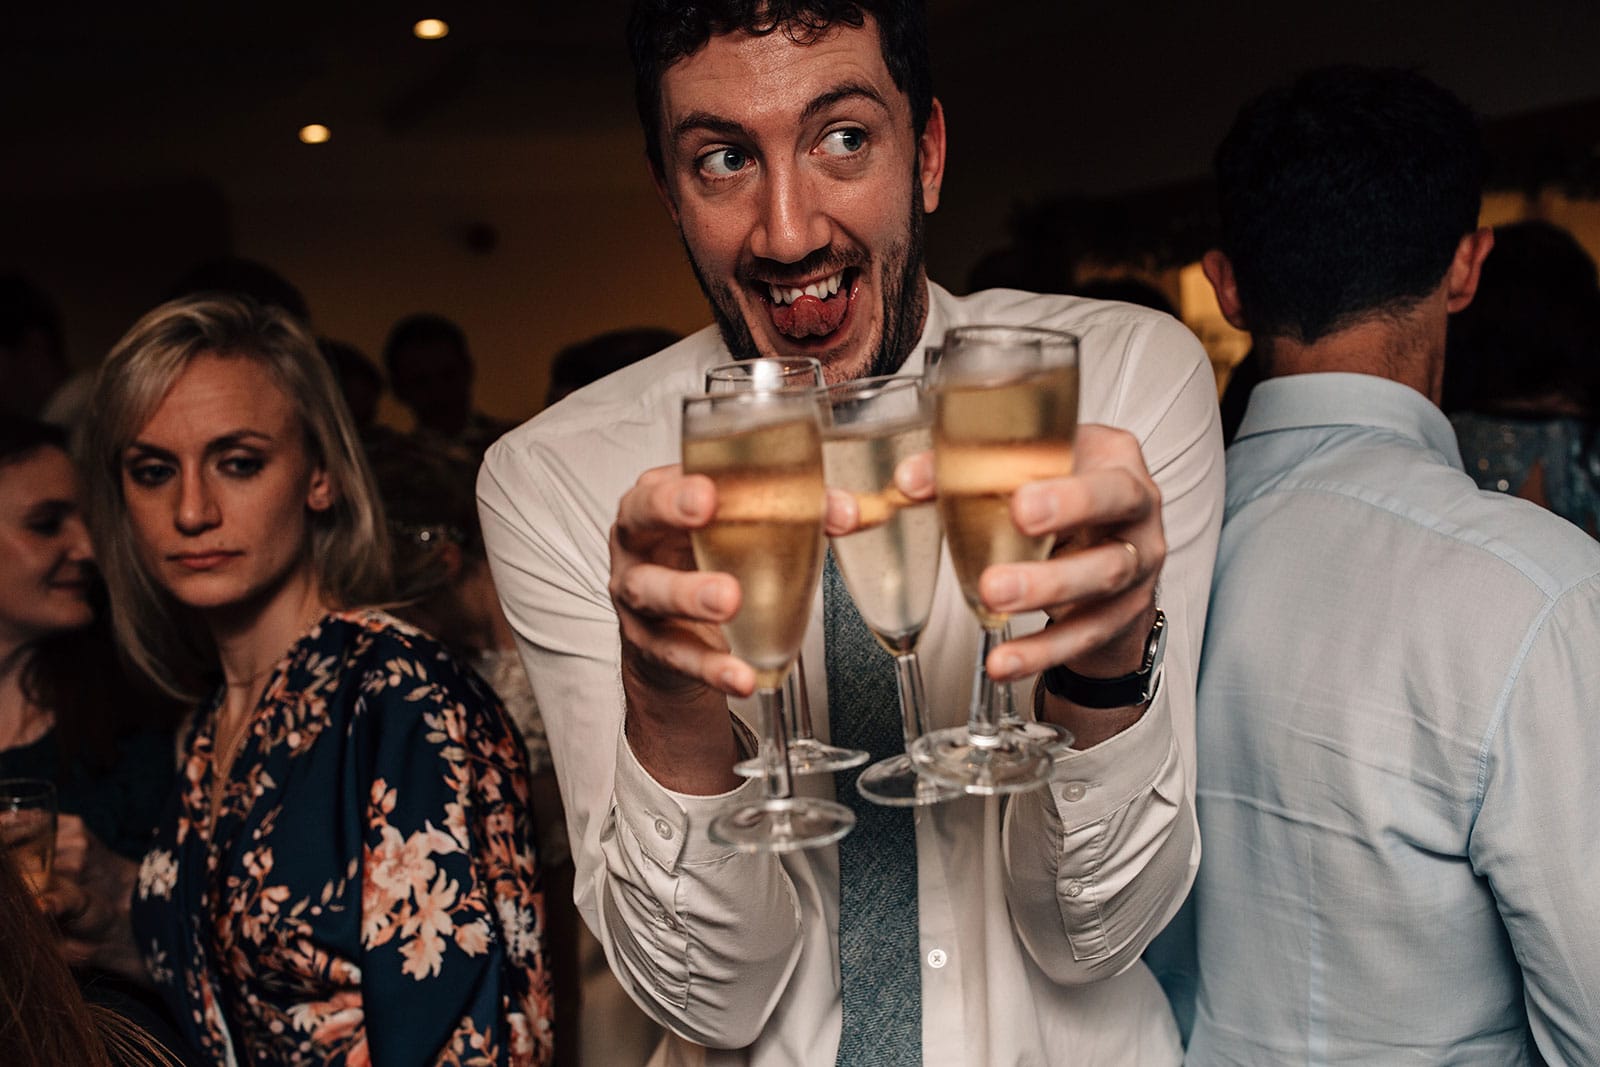 Fun wedding photography of a wedding guest carrying too many drinks